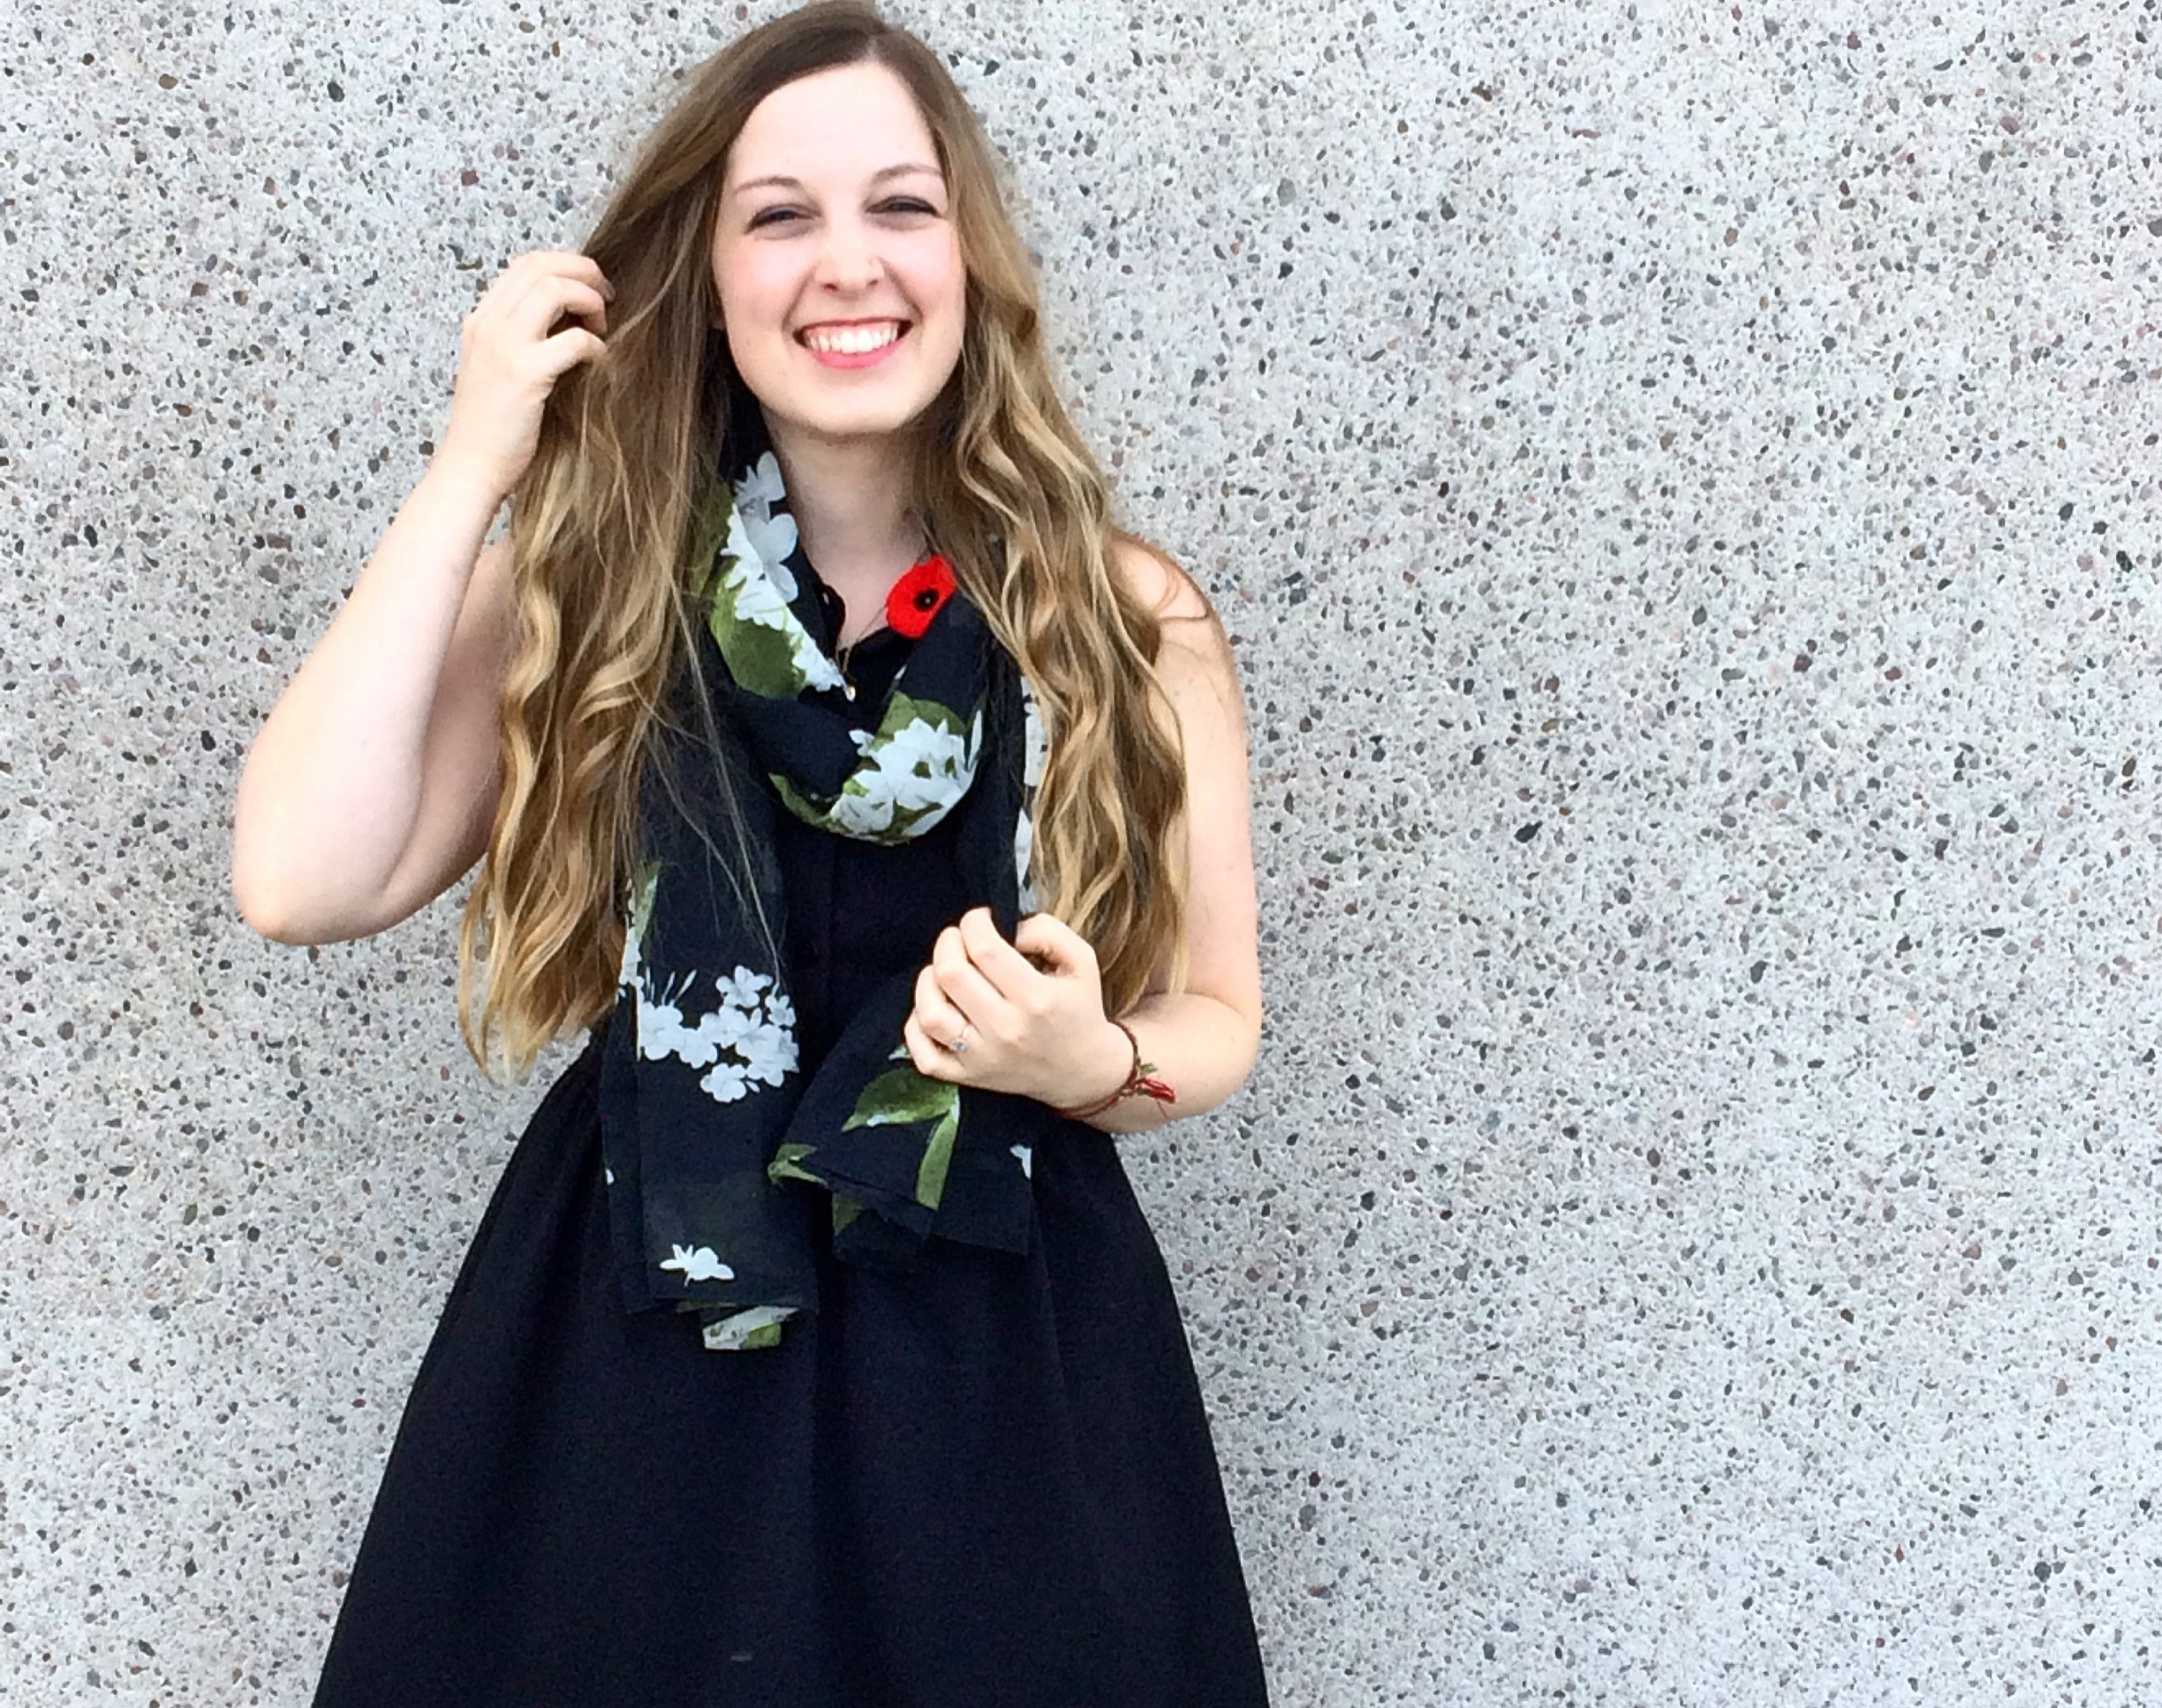 Life Lessons From Wearing The Same Little Black Dress For 30 Days